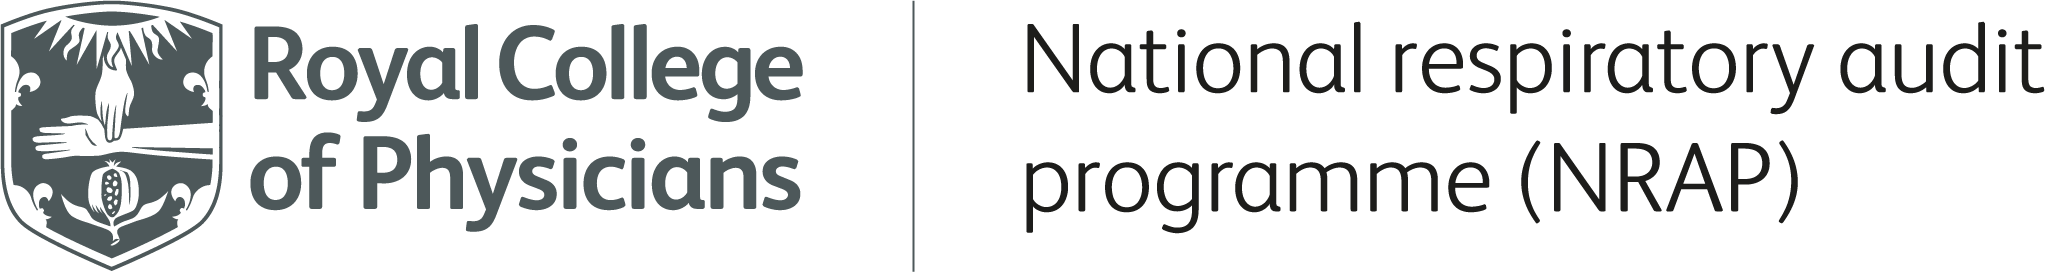 Logo for Royal College of Physicians - National Respiratory Audit Programme (NRAP)